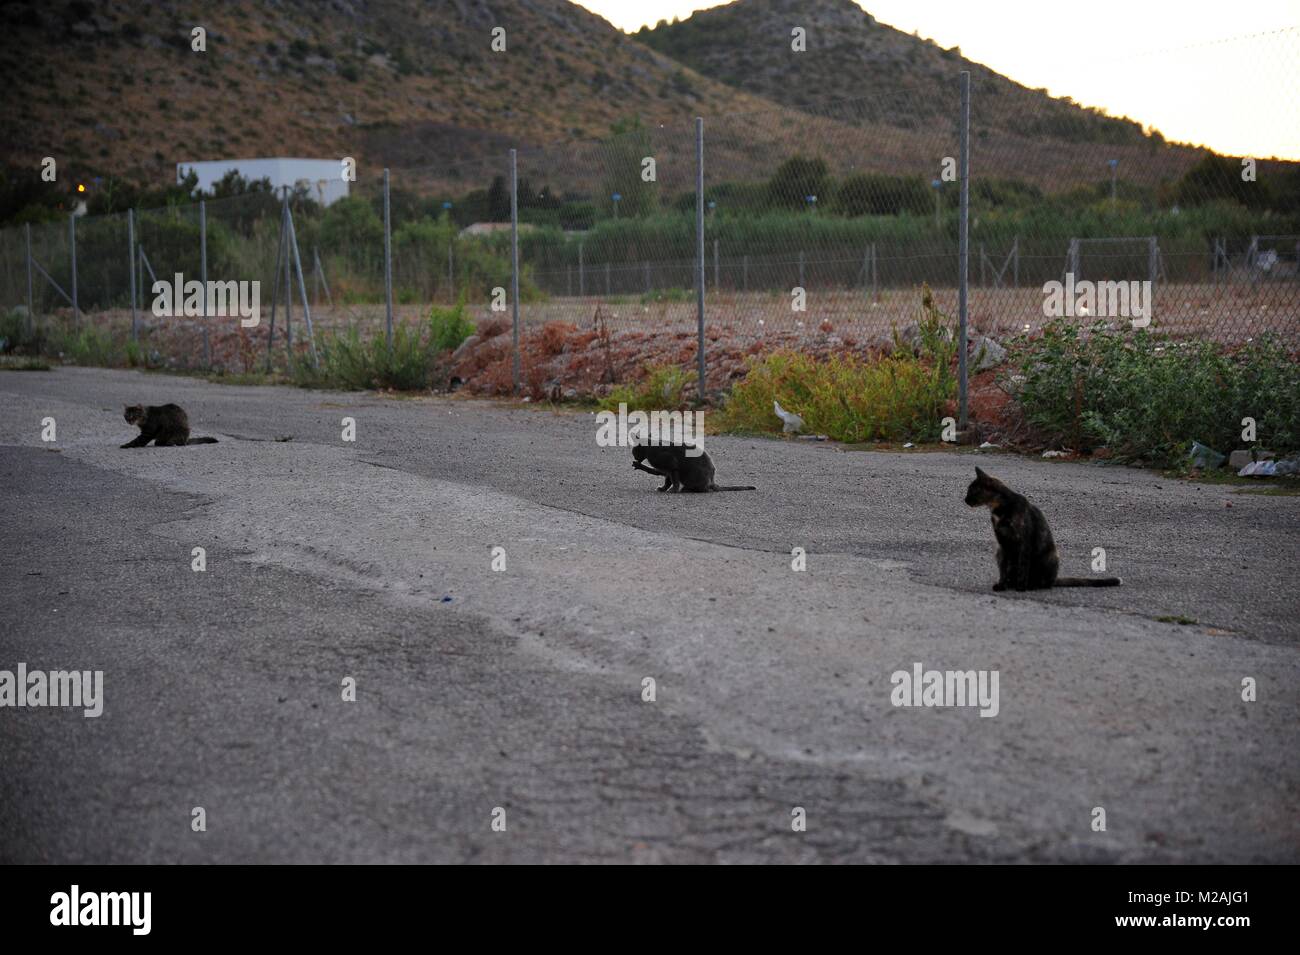 3 wild cats living on the garbage dump in front of a mountain show the dark side of tourism on the Mediterranean coast Stock Photo